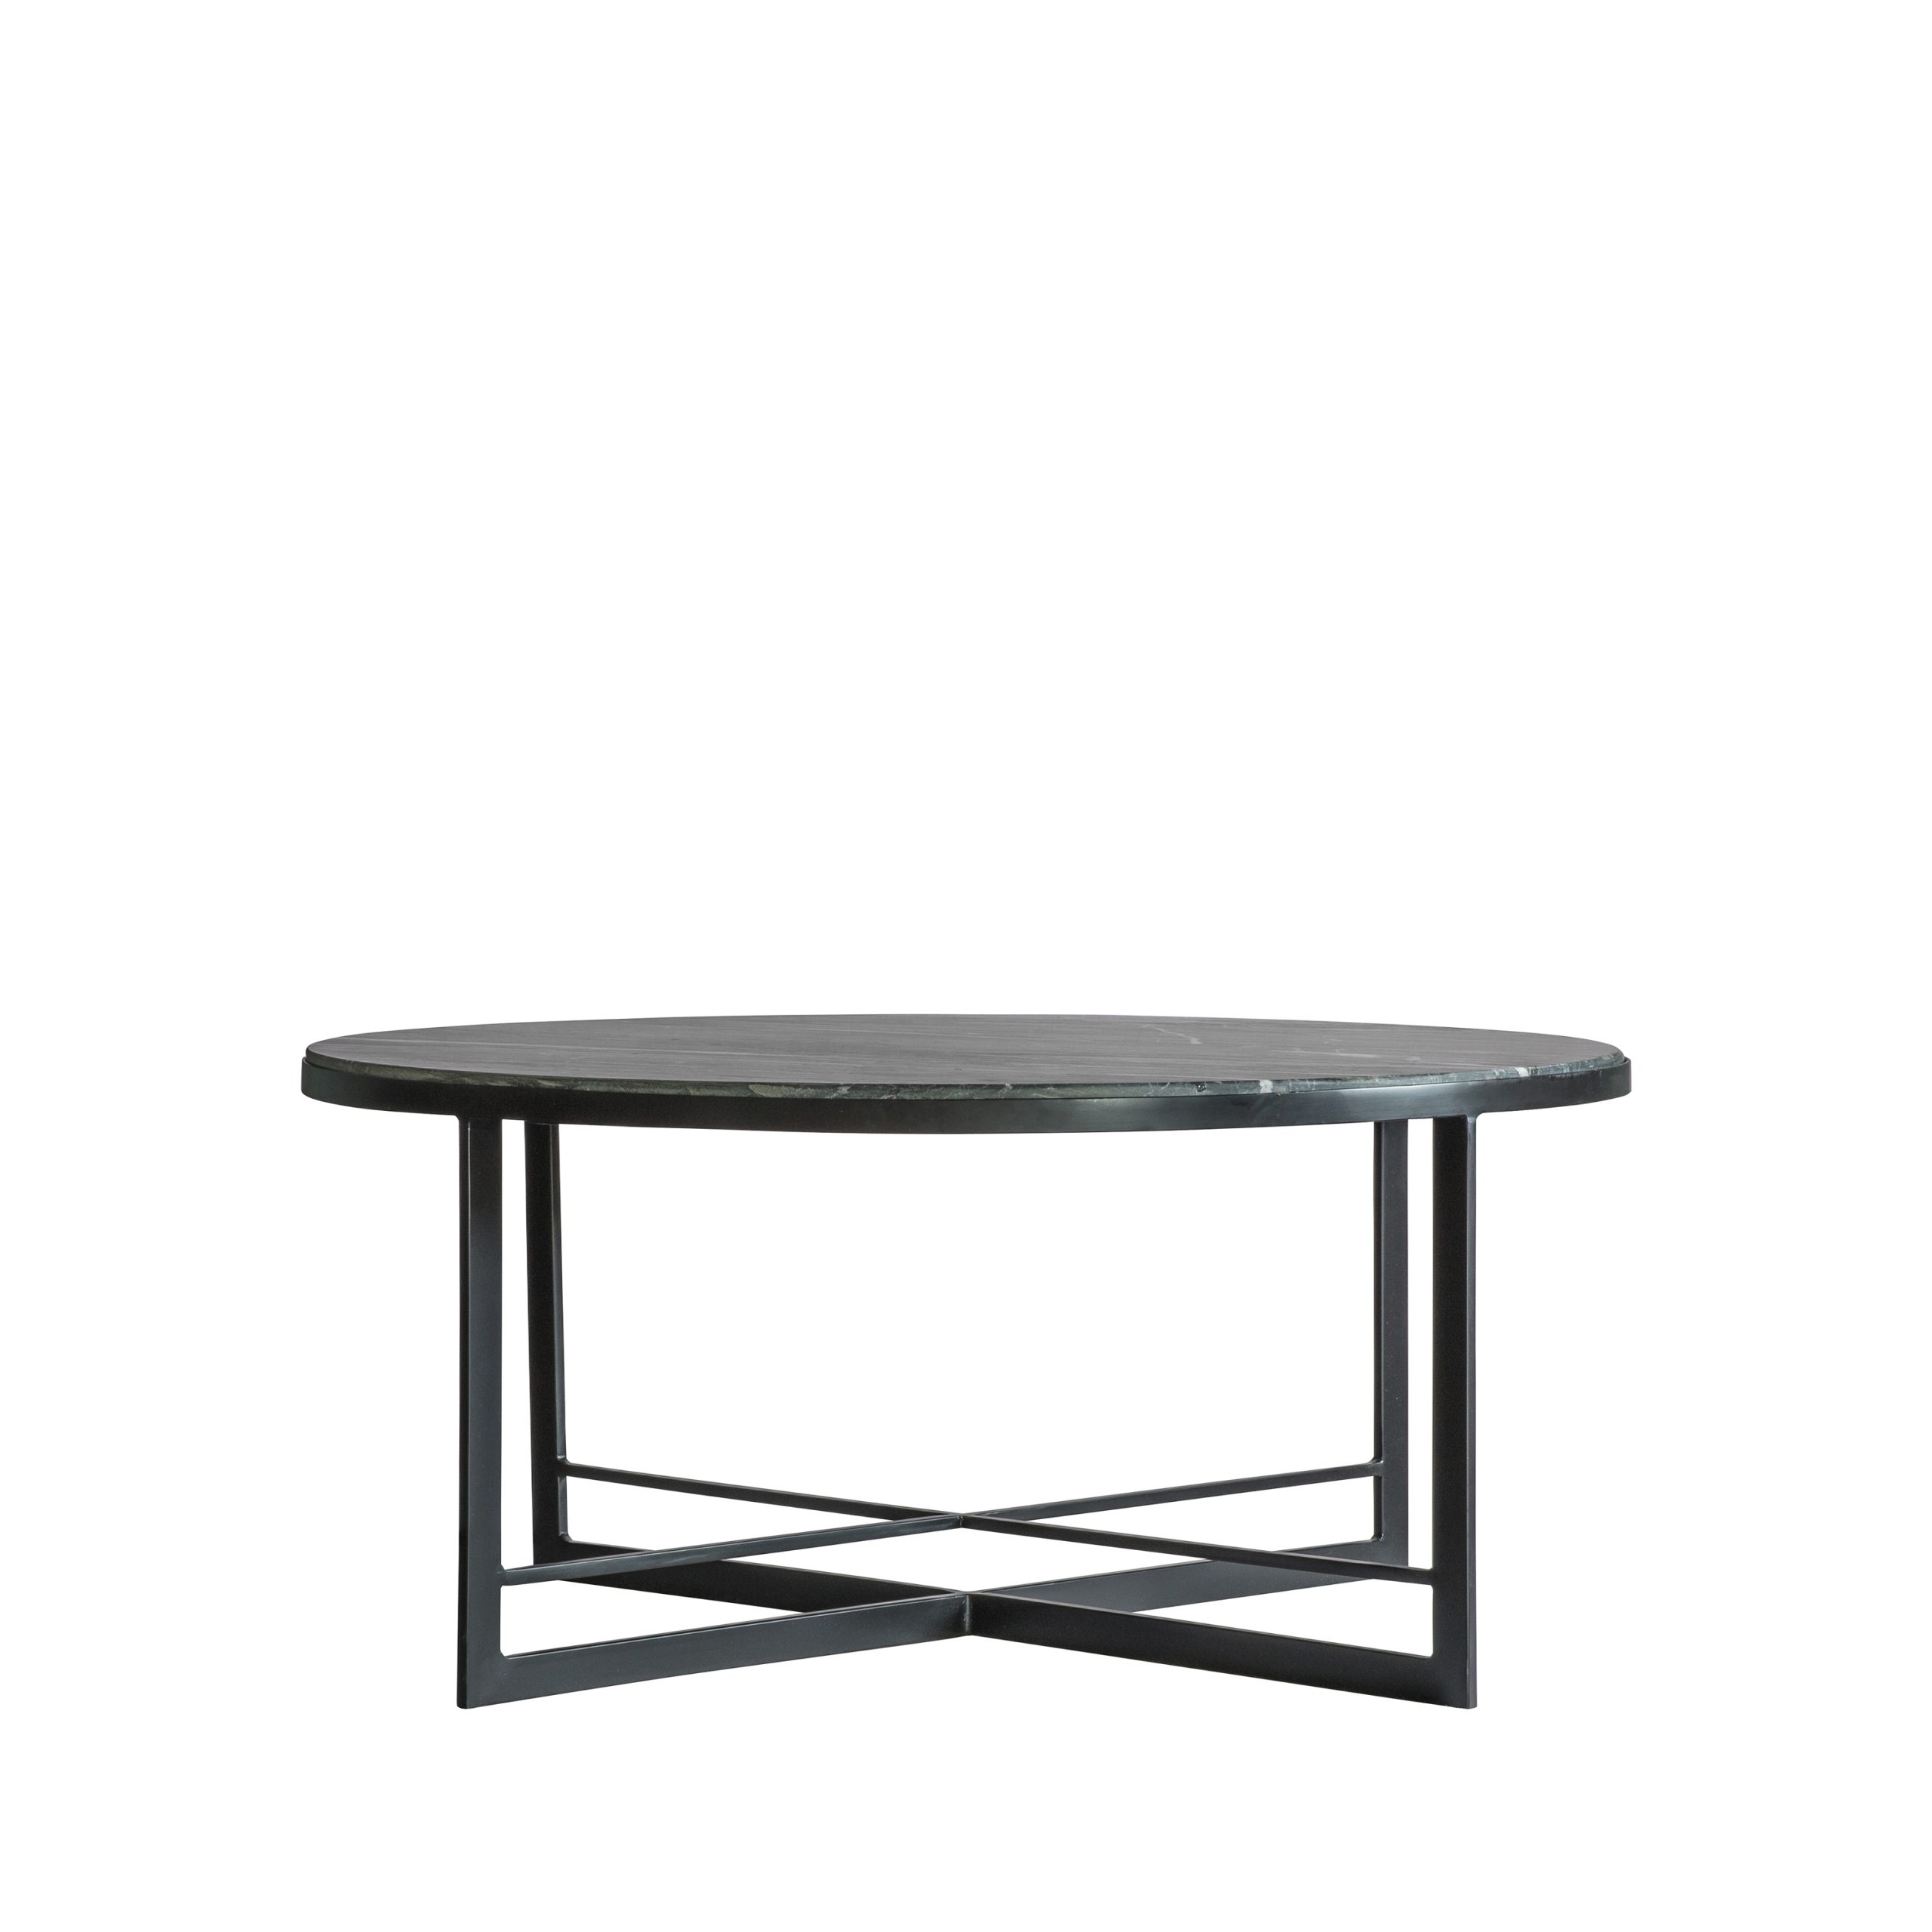 Gallery Direct Necton Coffee Table Black